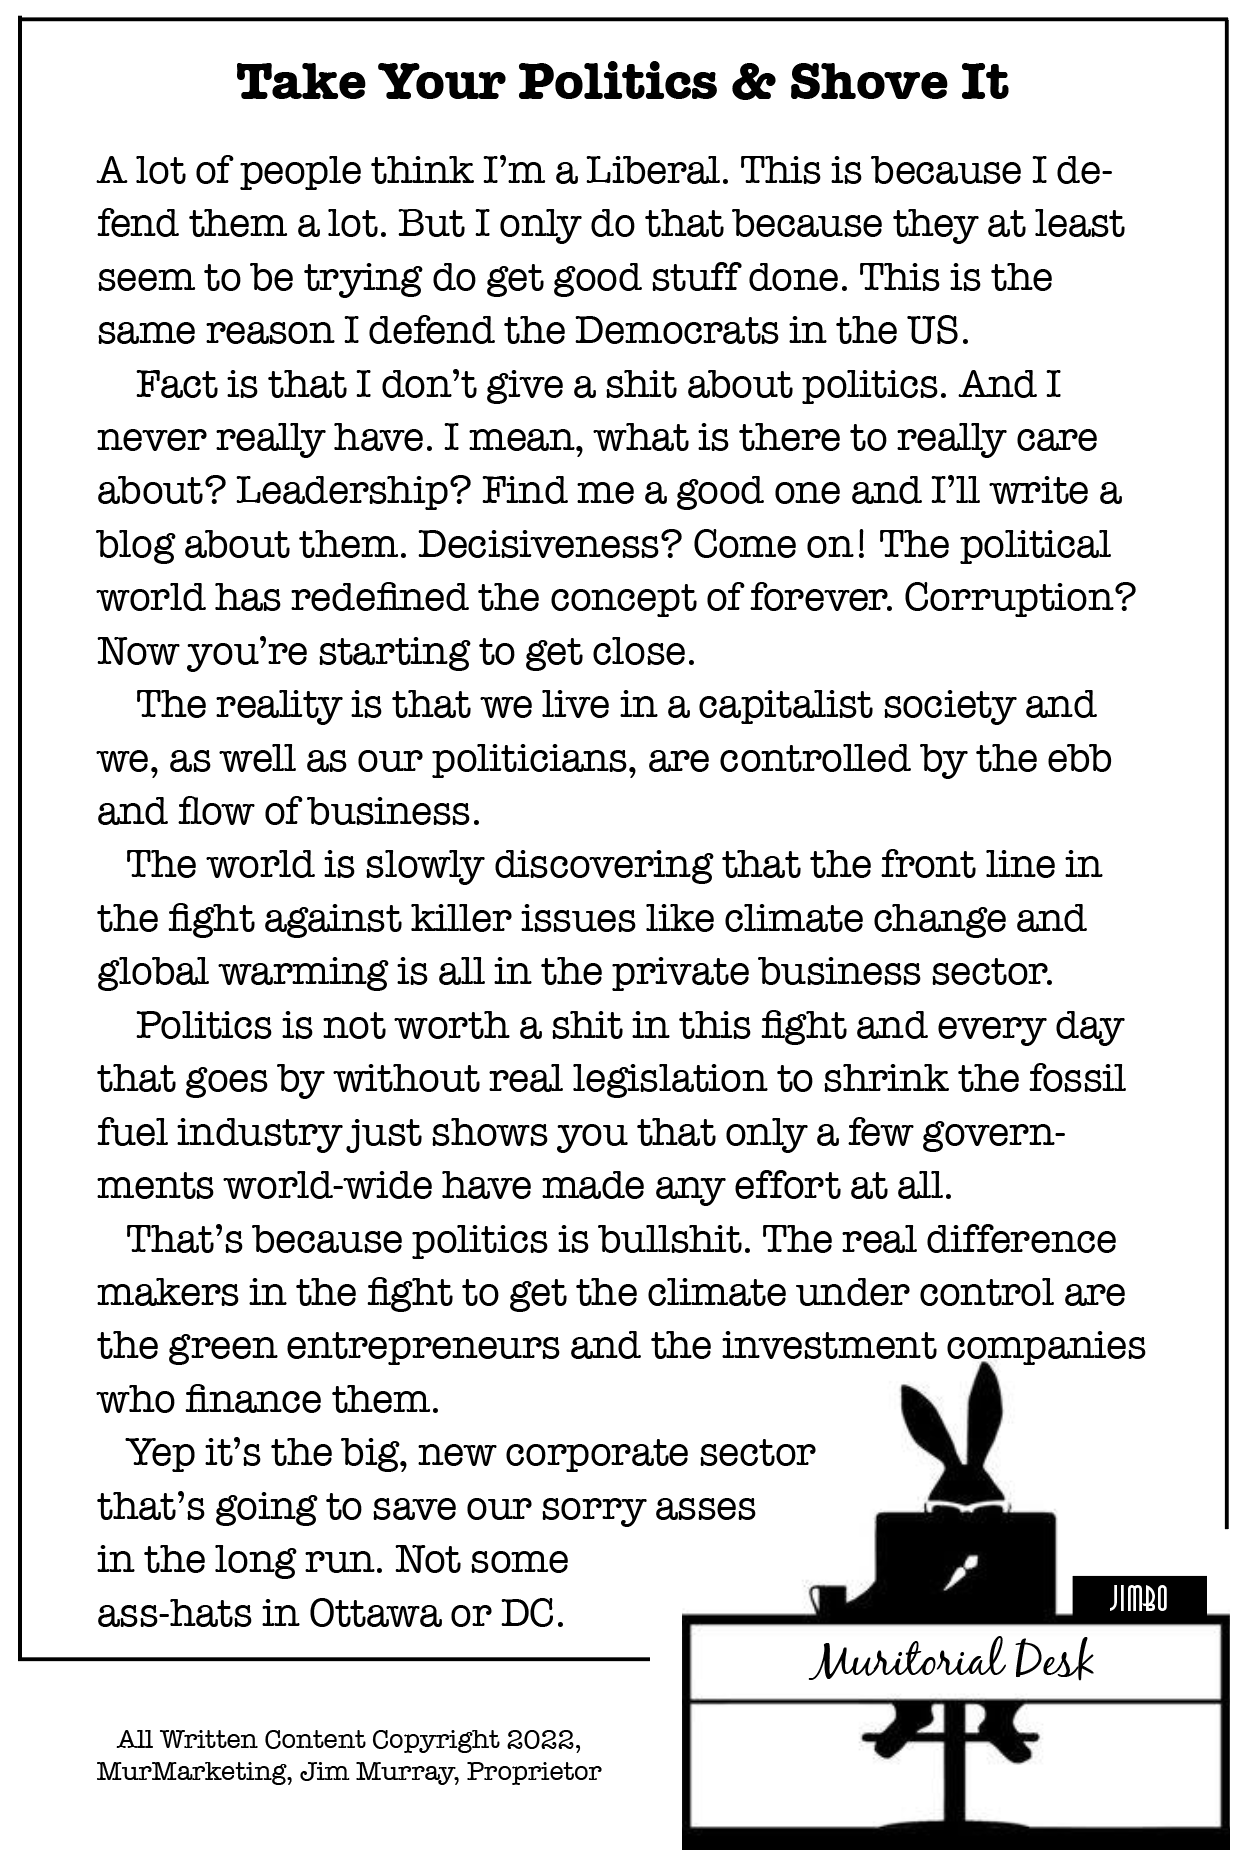 Take Your Politics & Shove It

A lot of people think I'm ag Liberal. This is because I de-
fend them a lot. But I only do that because they at least
seem to be trying do get good stuff done. This is the
same reason I defend the Democrats in the US.

Fact is that I don’t give a shit about politics. And I
never really have. I mean, what is there to really care
about? Leadership? Find me a good one and I'll write a
blog about them. Decisiveness? Come on! The political
world has redefined the concept of forever. Corruption?
Now you're starting to get close.

The reality is that we live in a capitalist society and
we, as well as our politicians, are controlled by the ebb
and flow of business.

The world is slowly discovering that the front line in
the fight against killer issues like climate change and
global warming is all in the private business sector.

Politics is not worth a shit in this fight and every day
that goes by without real legislation to shrink the fossil
fuel industry just shows you that only a few govern-
ments world-wide have made any effort at all.

That's because politics is bullshit. The real difference
makers in the fight to get the climate under control are
the green entrepreneurs and the investment companies
who finance them.

Yep it’s the big, new corporate sector
that’s going to save our sorry asses
in the long run. Not some
ass-hats in Ottawa, or DC.

  

All Written Content Copyright 2022,
MurMarketing, Jim Murray, Proprietor